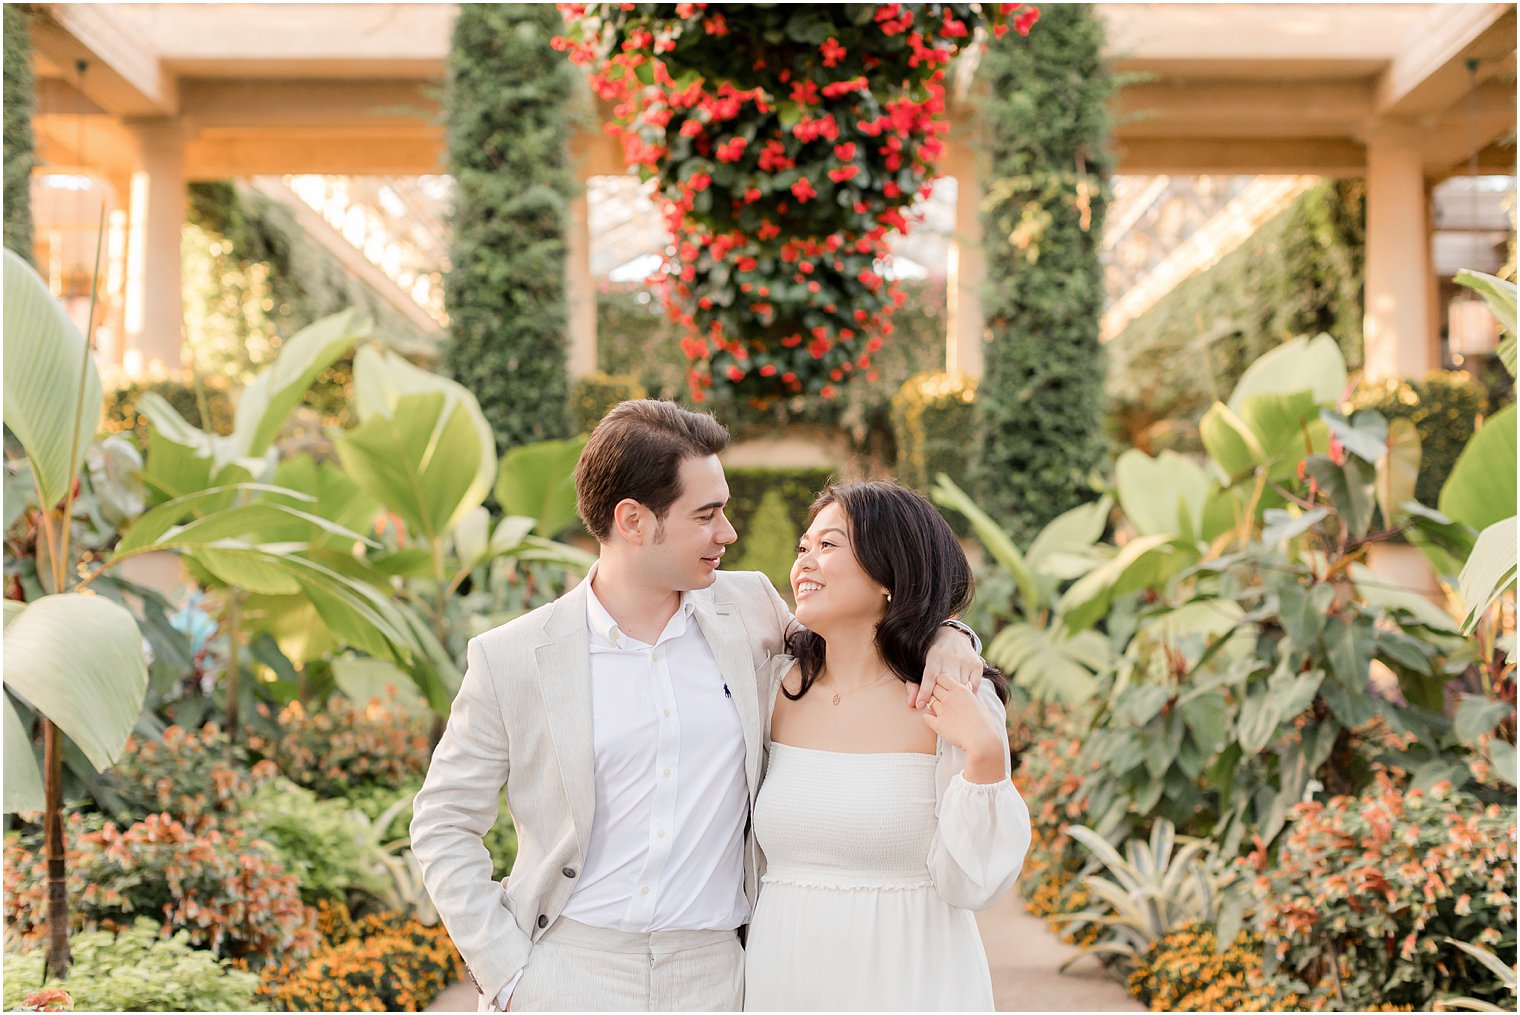 bride and groom smile together by greenery in Longwood Gardens